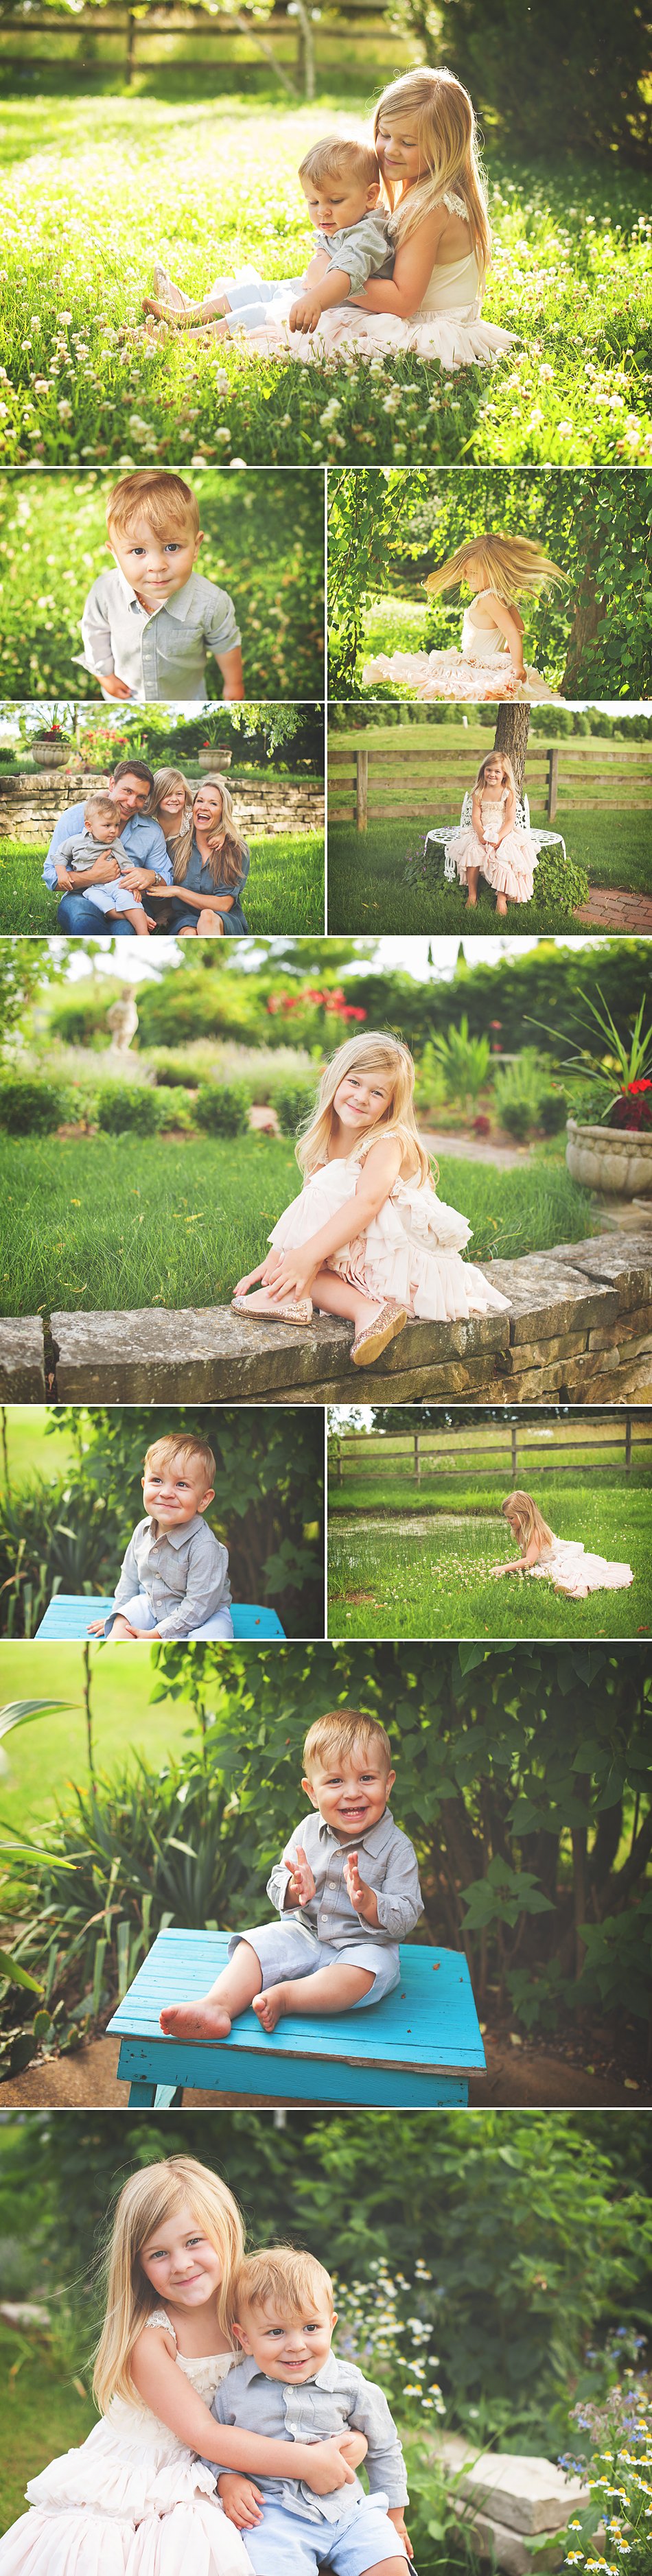 outdoor natural family child photography milwaukee wisconsin